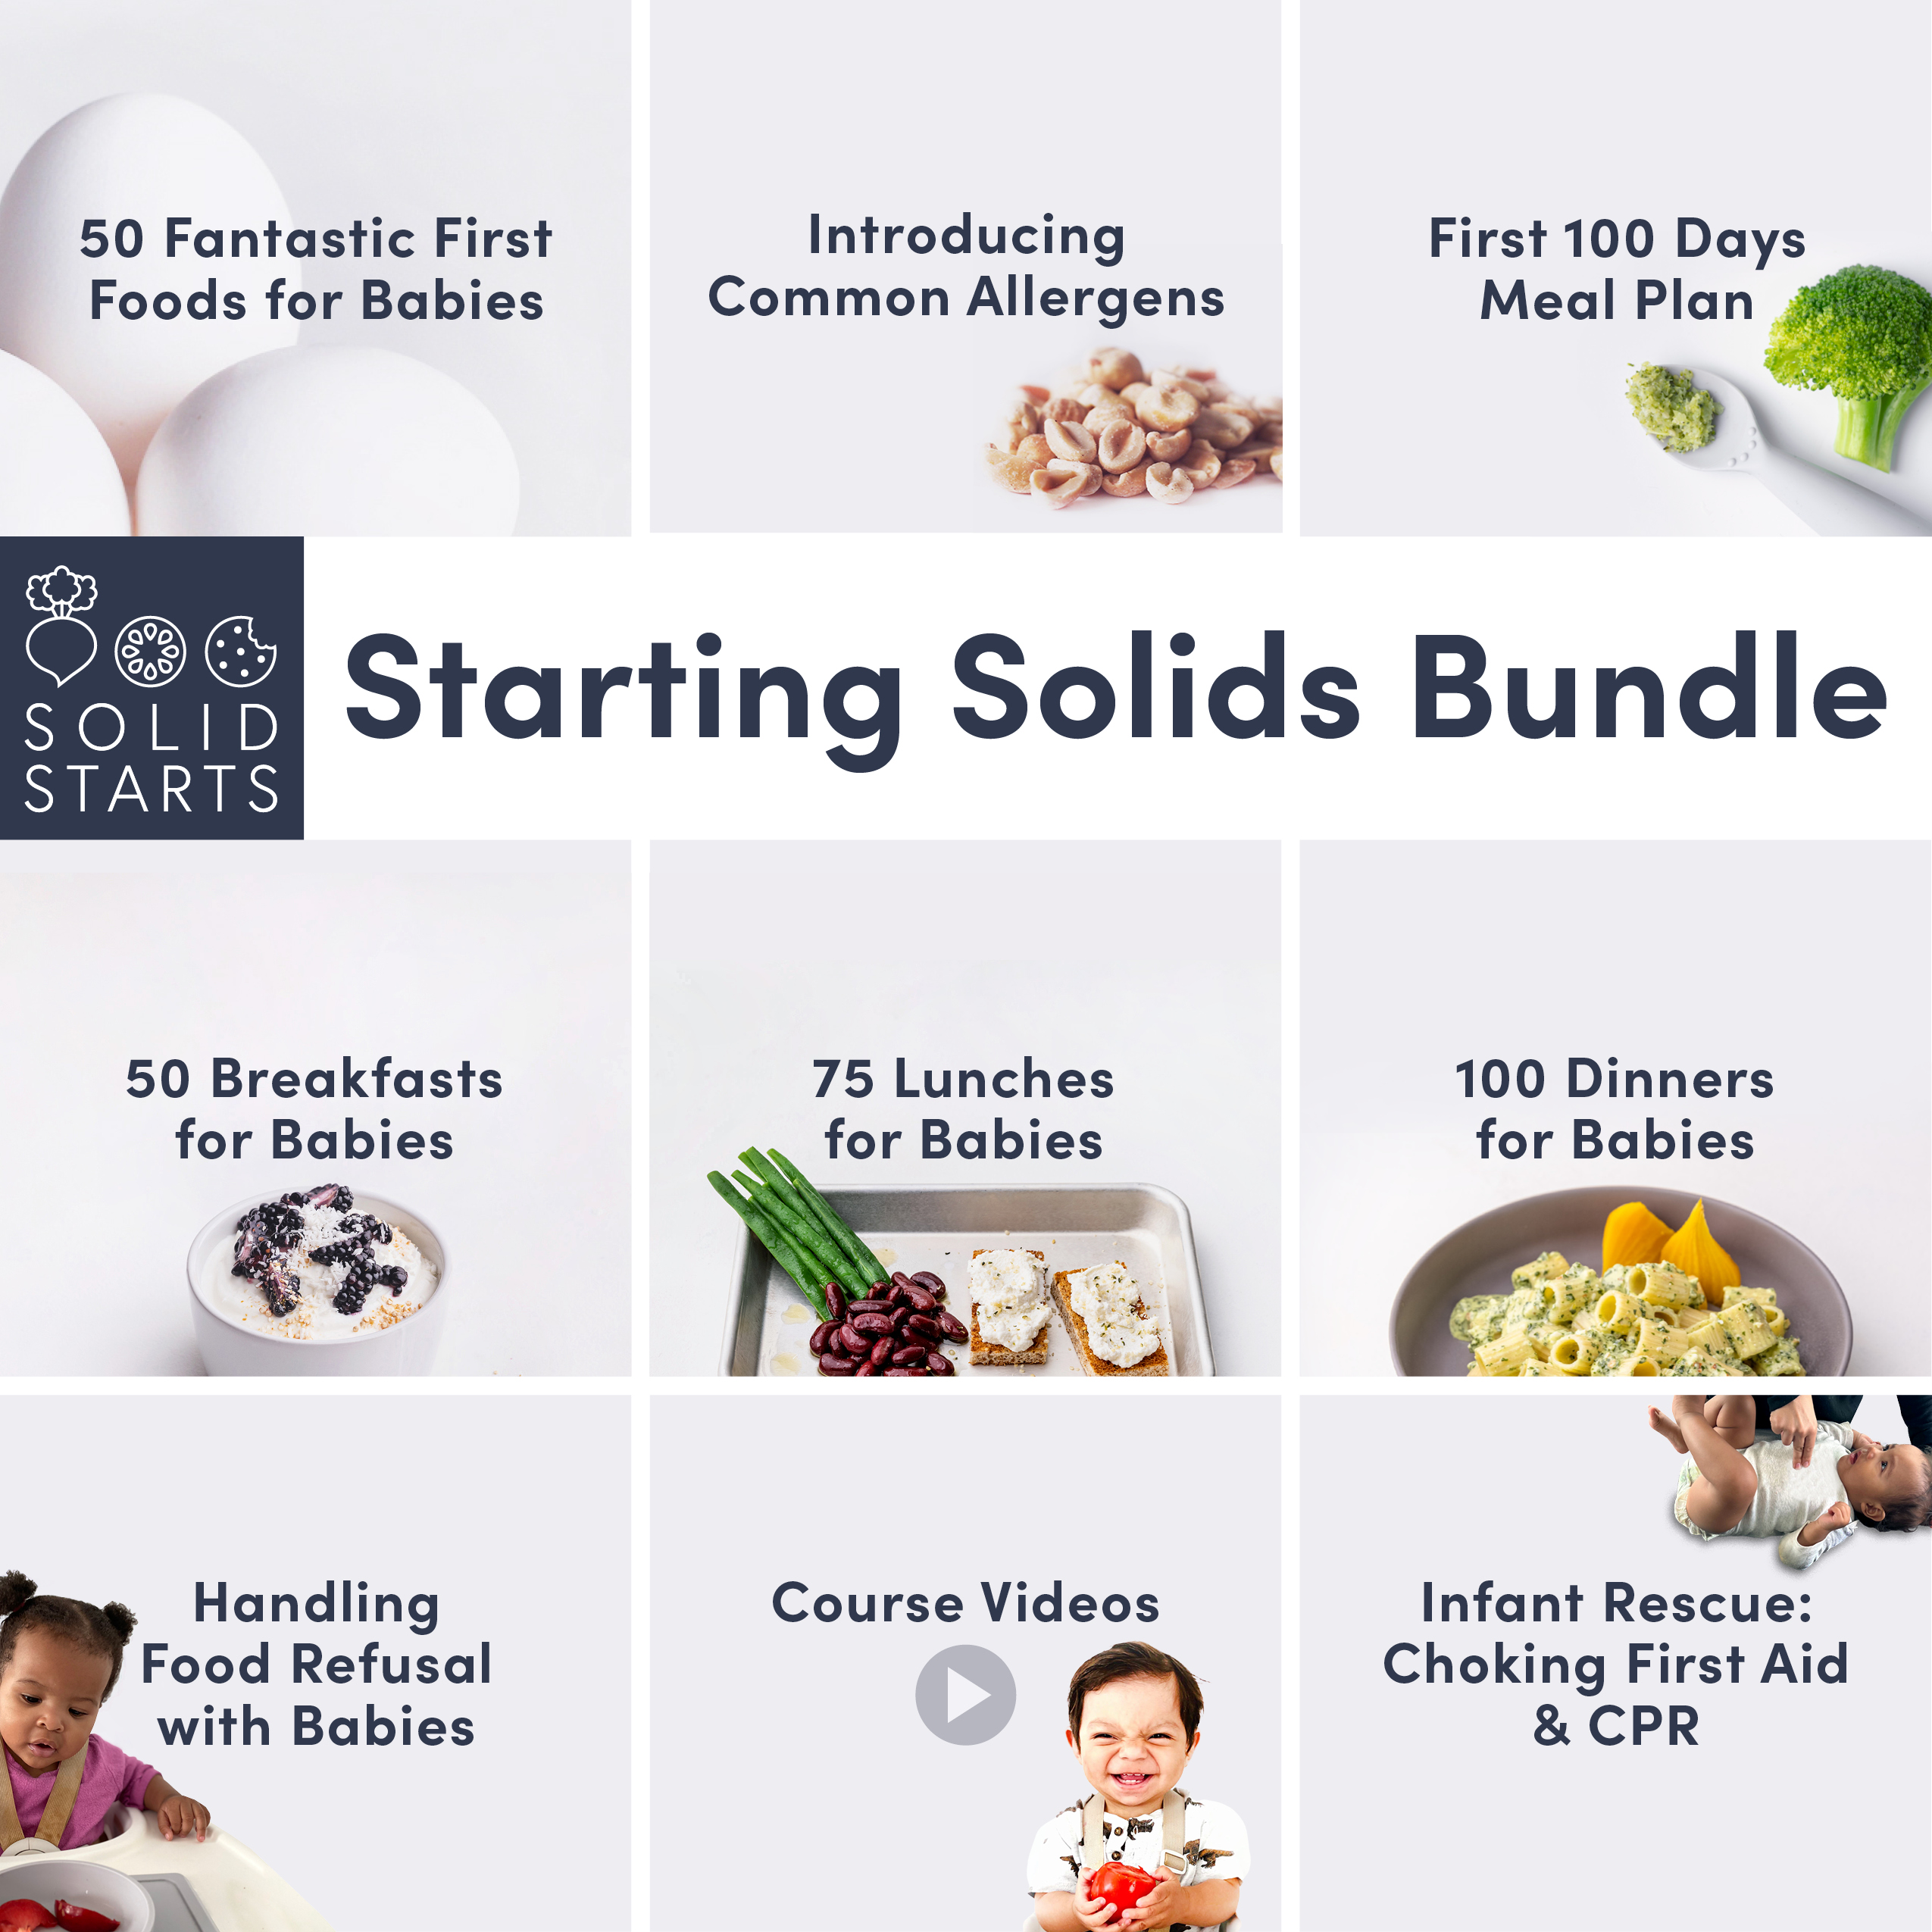 6-Month-Old Baby's Food Chart And Recipes